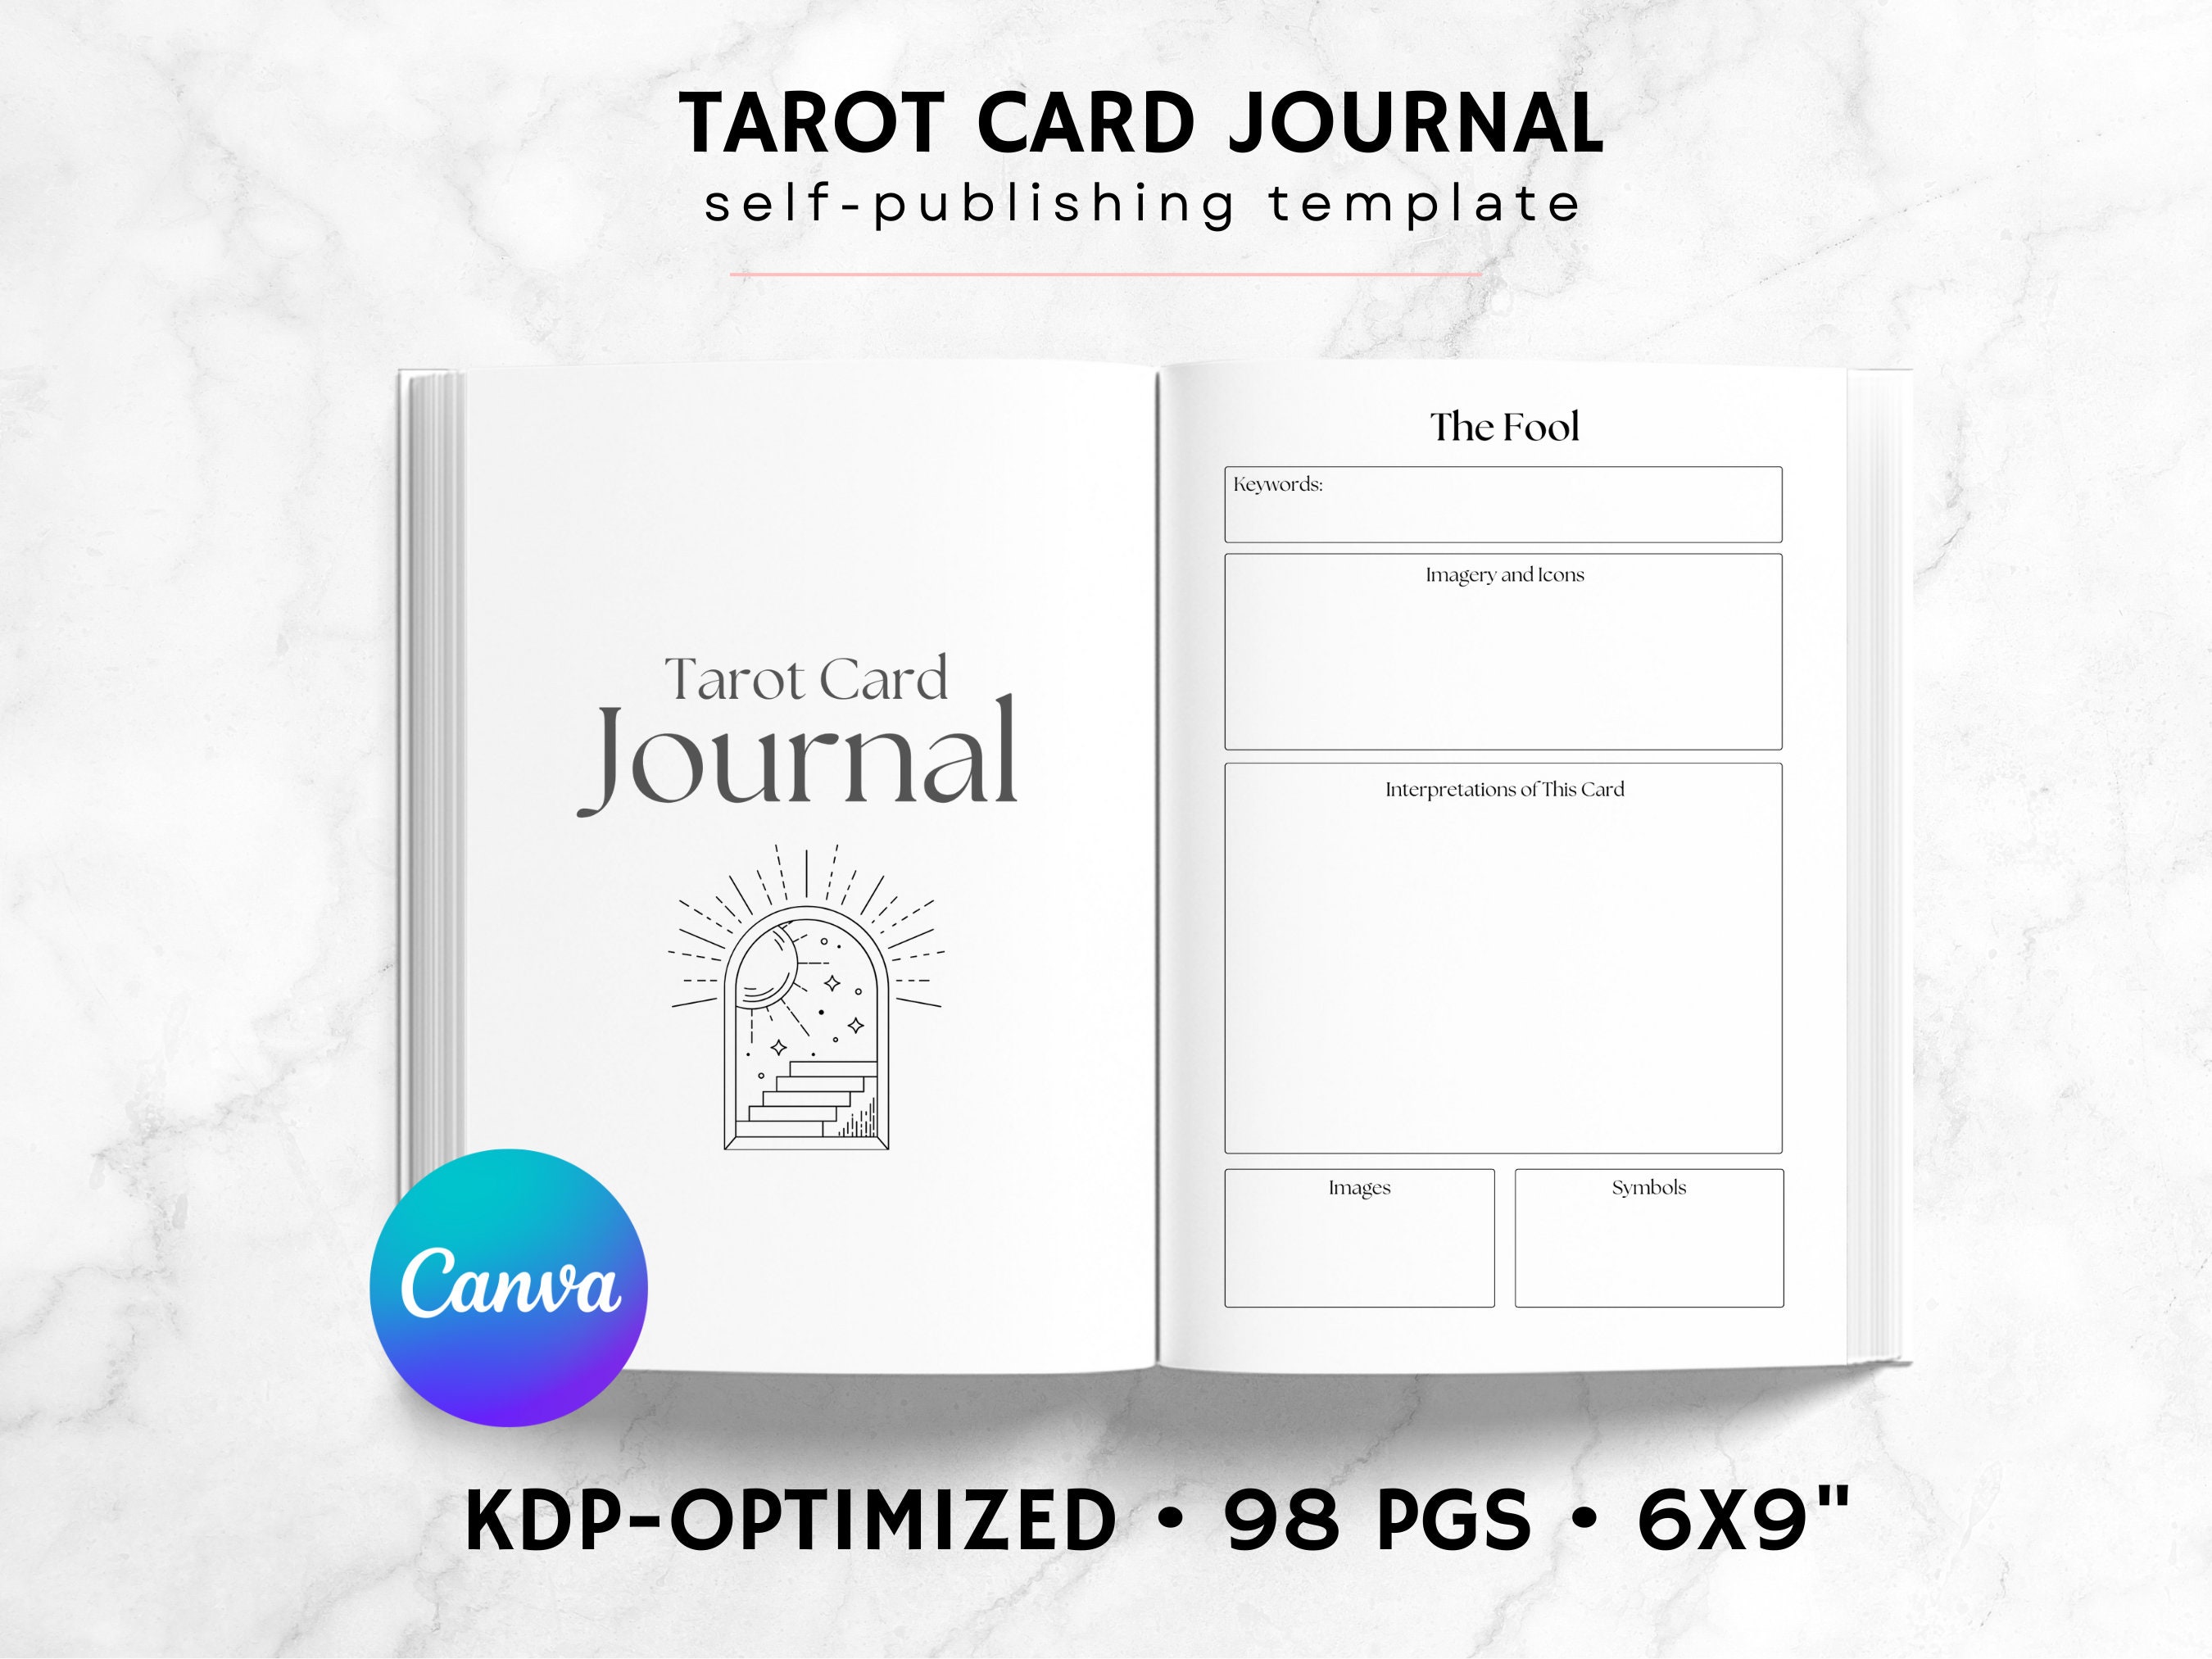 Card Mockup Open, 4x6 Greeting Card Front and Back Mockup for